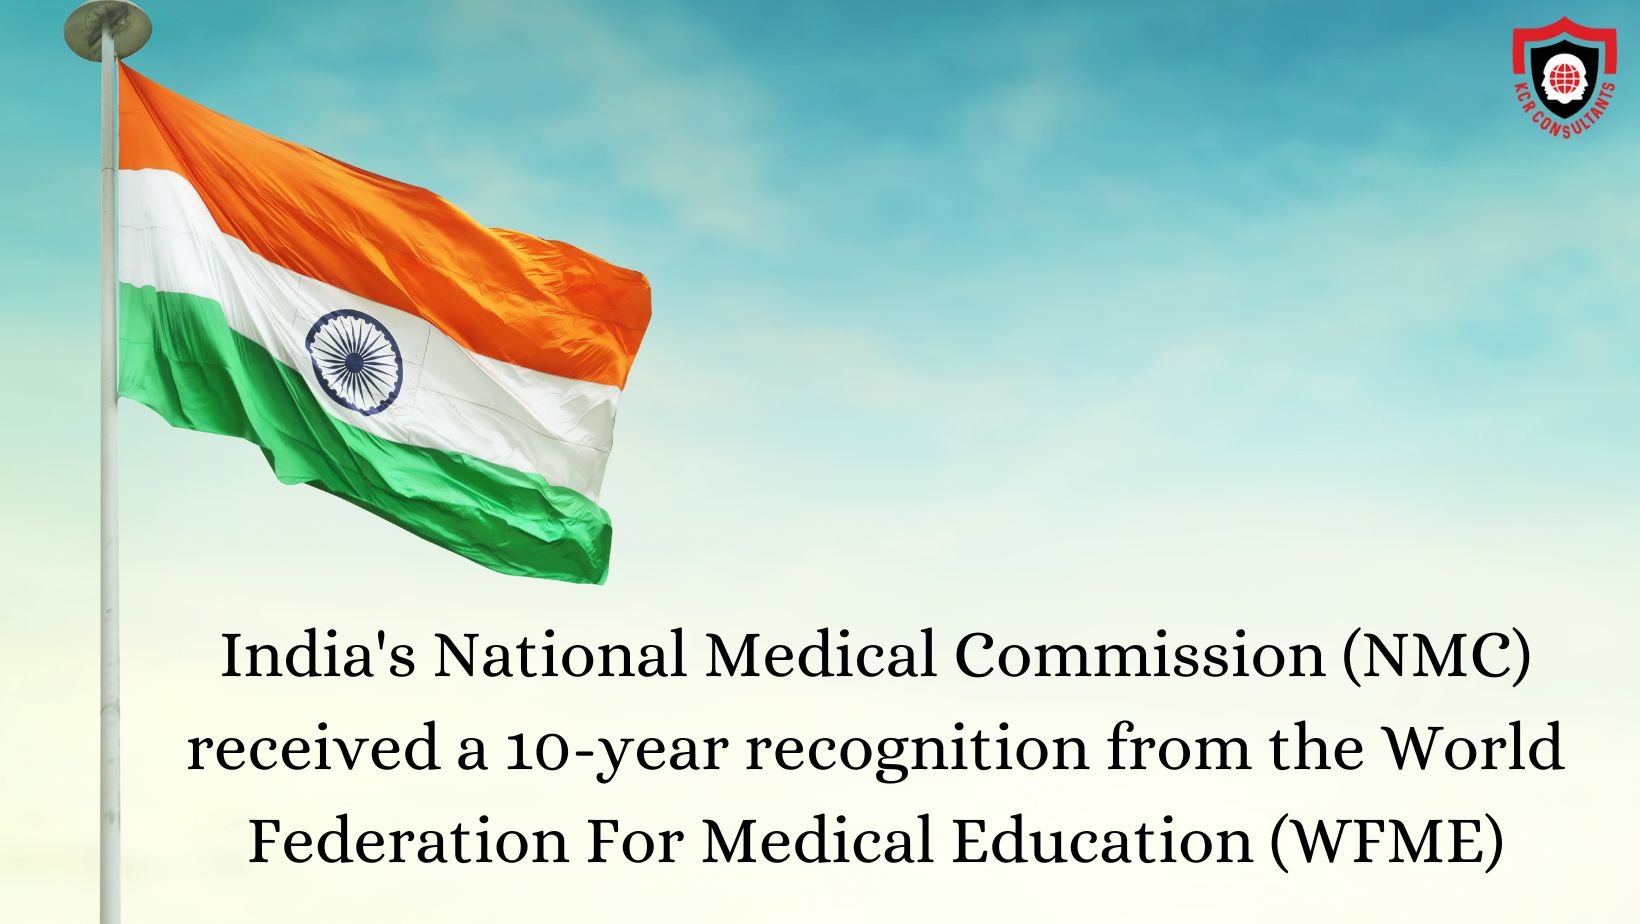 National Medical Commission (NMC) recognition by WFME - KCR Consultants - NMC & WFME recognition